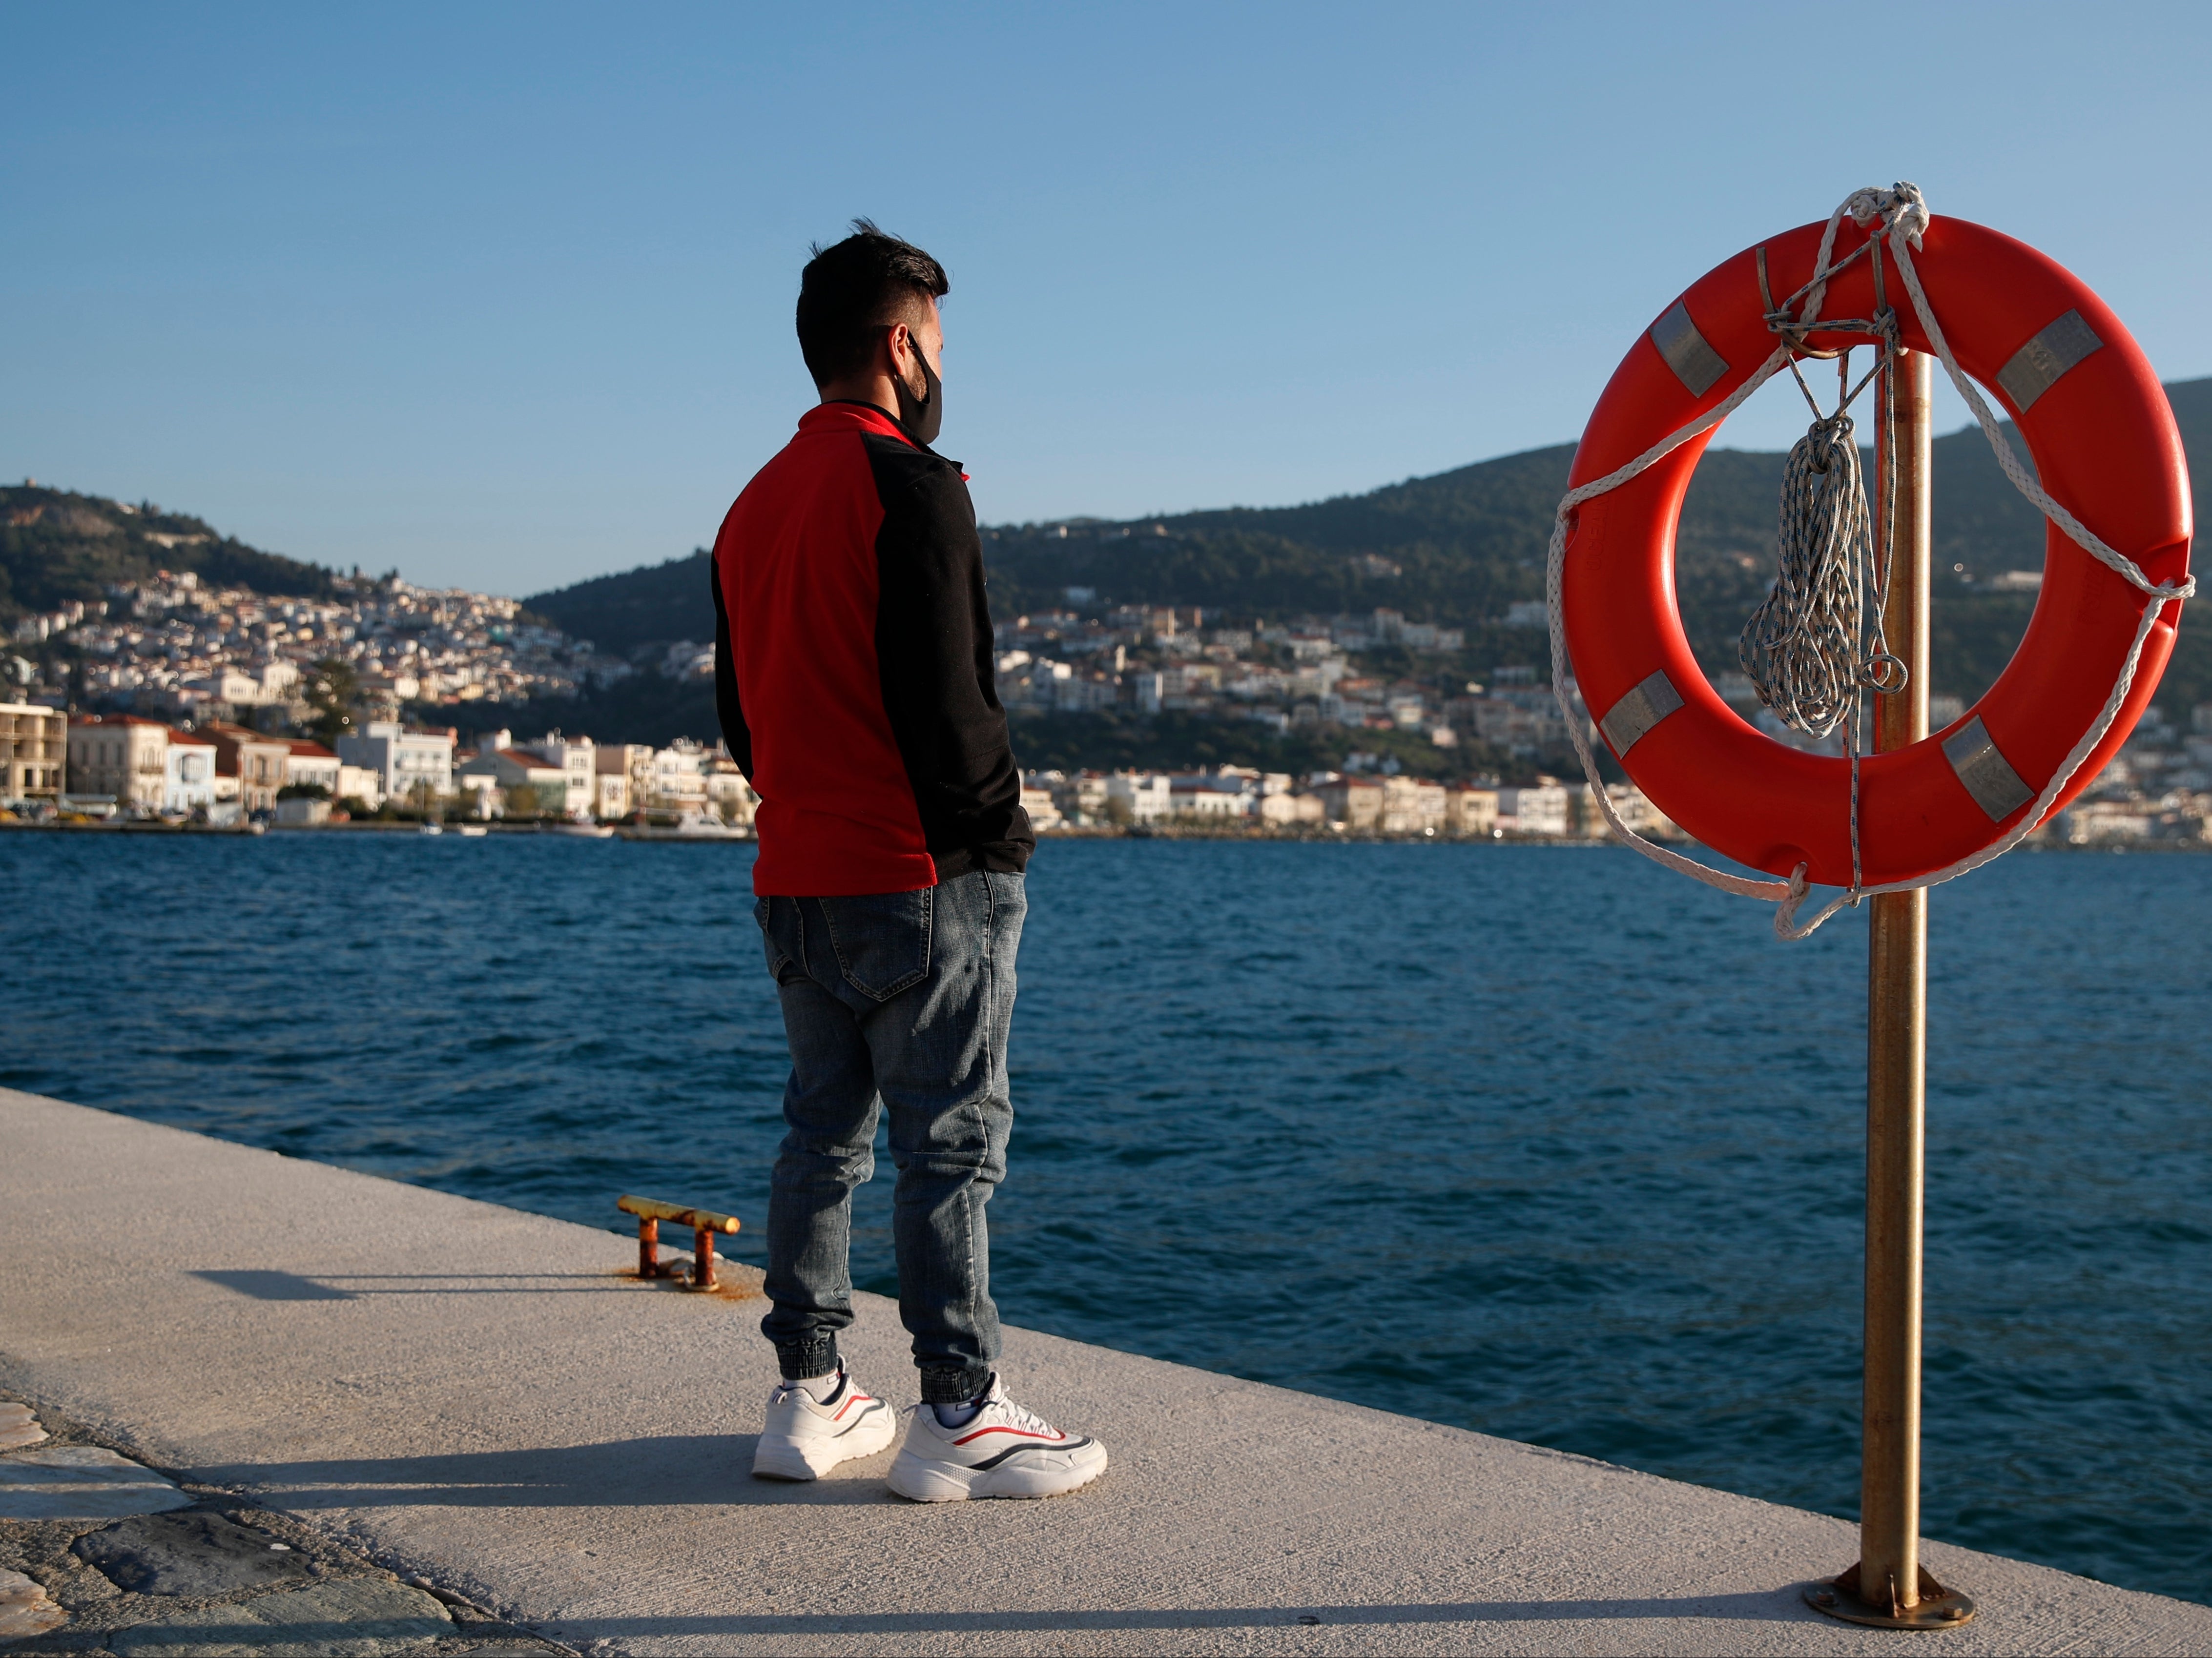 The 25-year-old father of a boy who died at sea while attempting to seek asylum in Greece faces up to 10 years in prison with charges of child endangerment